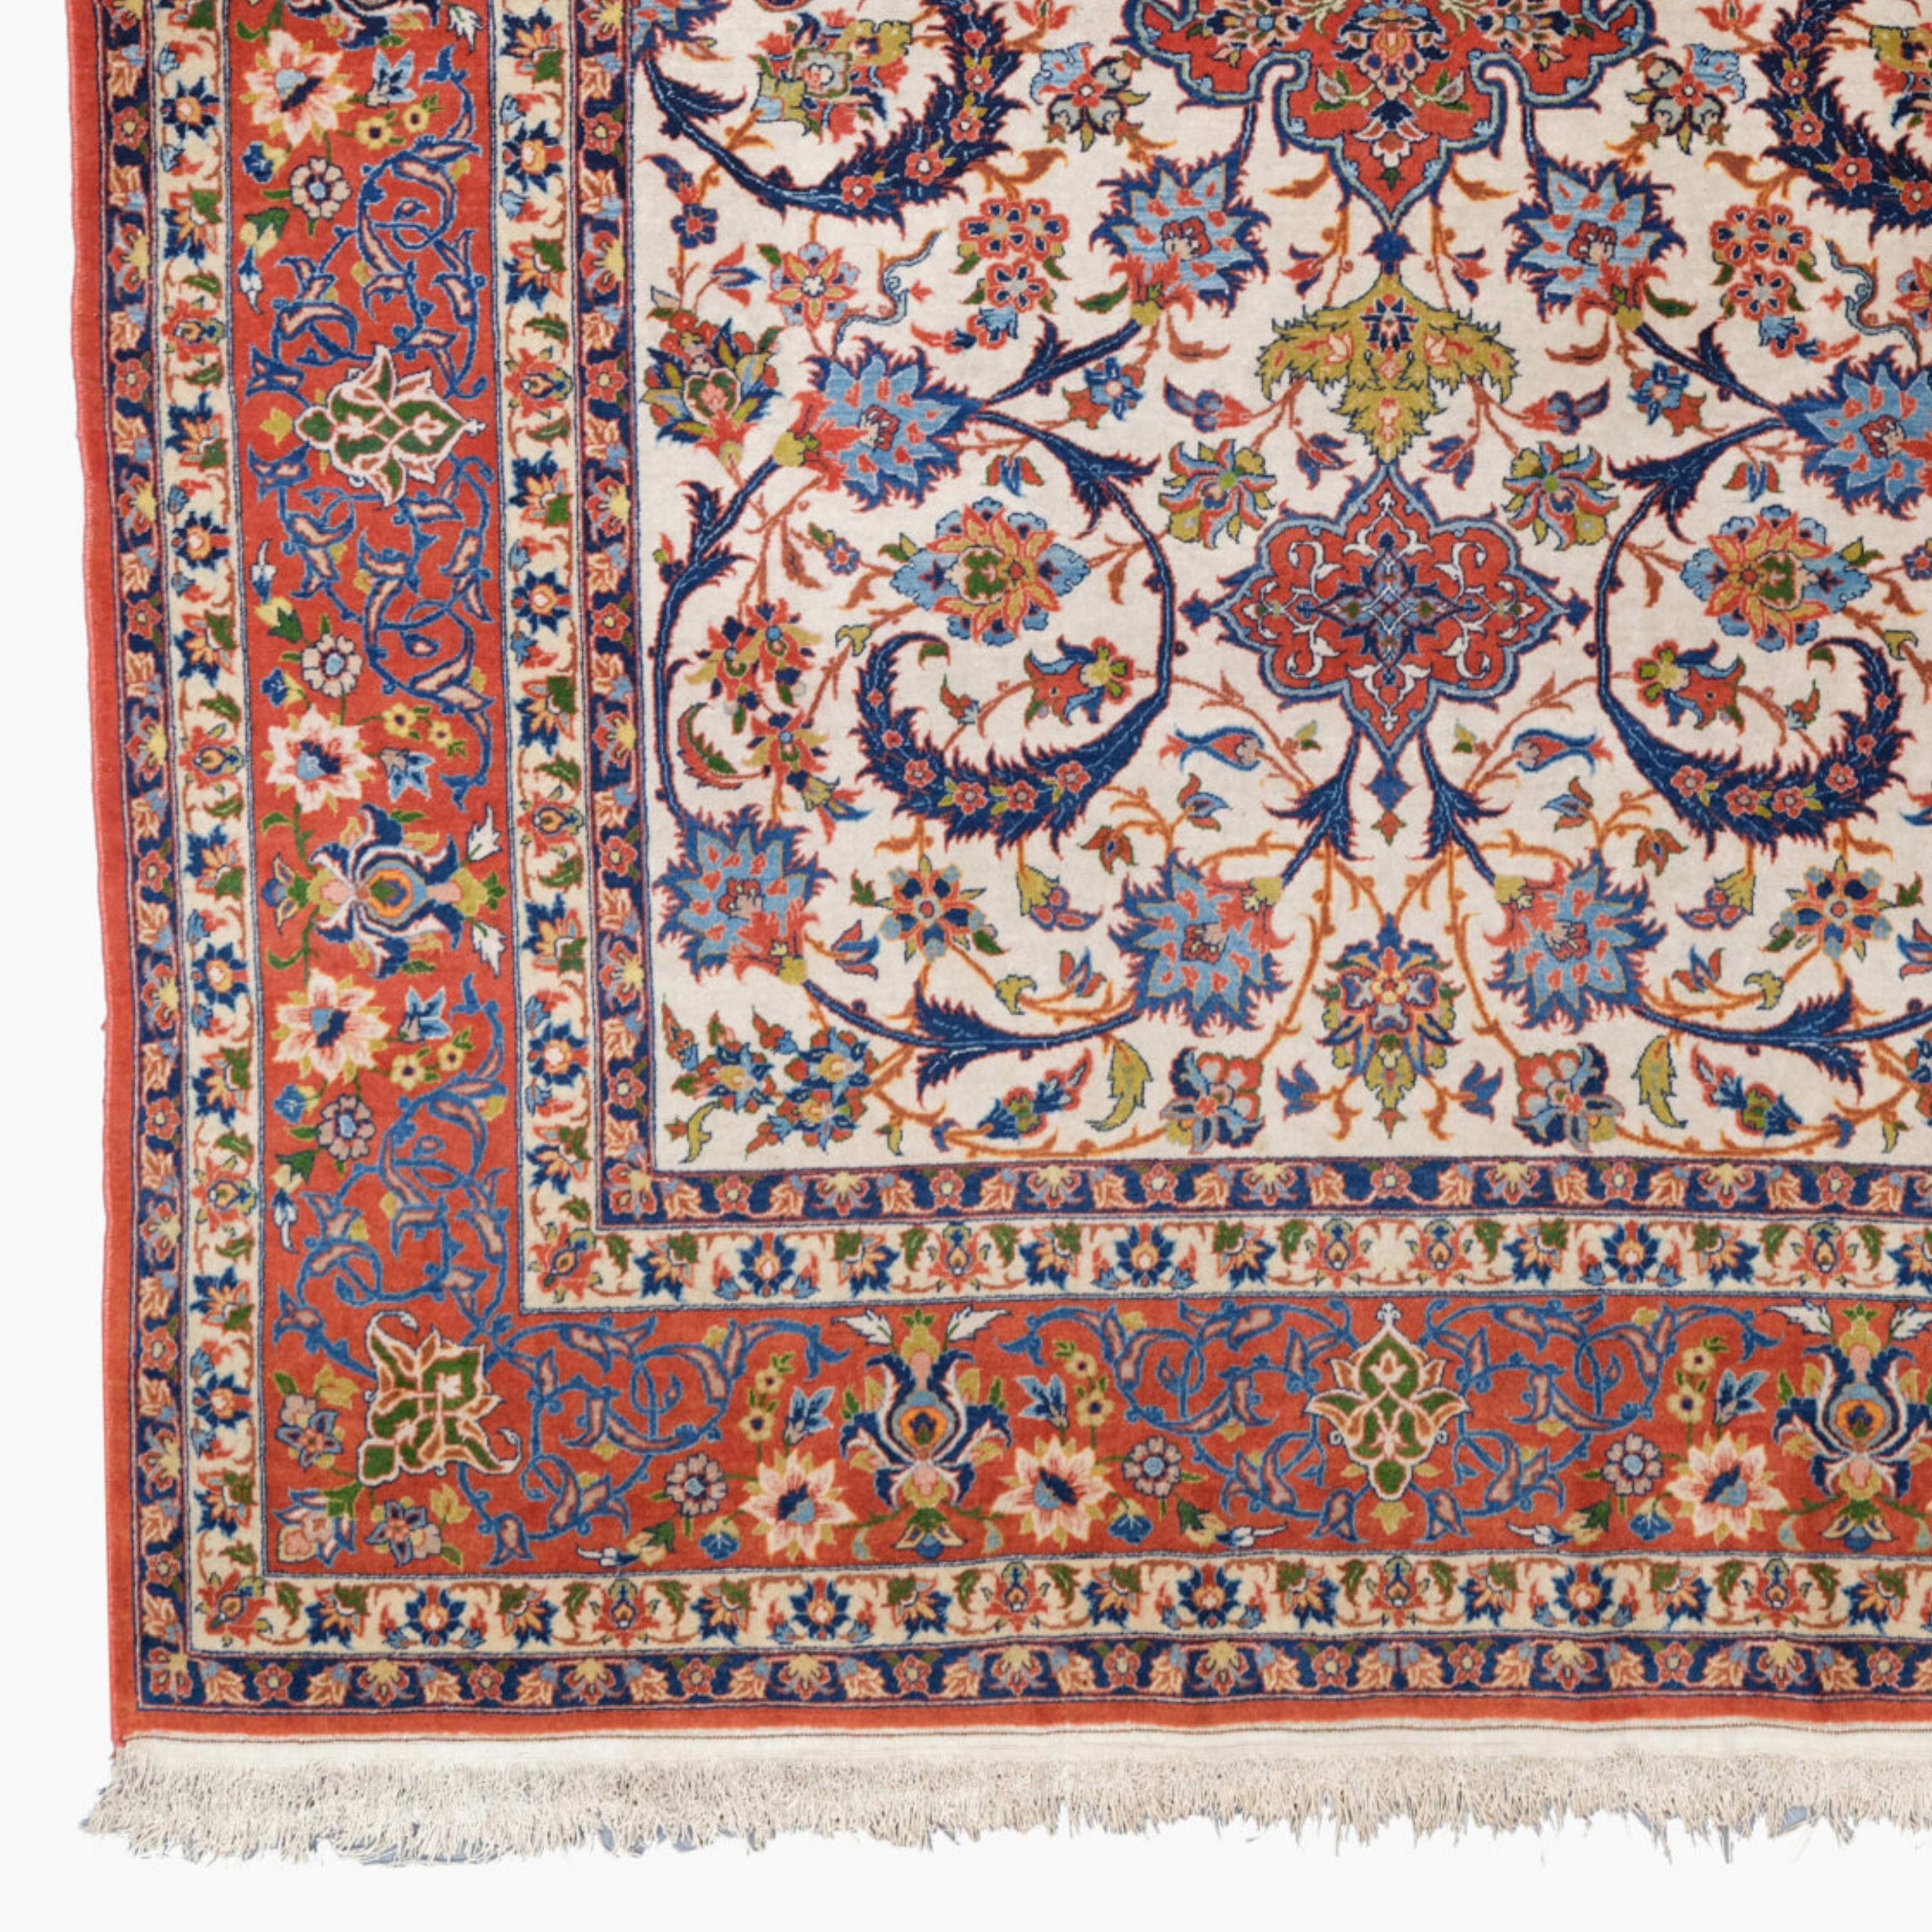 Antique Isfahan Rug  Late of 19th Century Isfahan Rug
Size: 154×224 cm

This magnificent carpet will fascinate you with its intricate designs and vibrant colors that reflect the rich history and craftsmanship of the period. Each stitch tells the